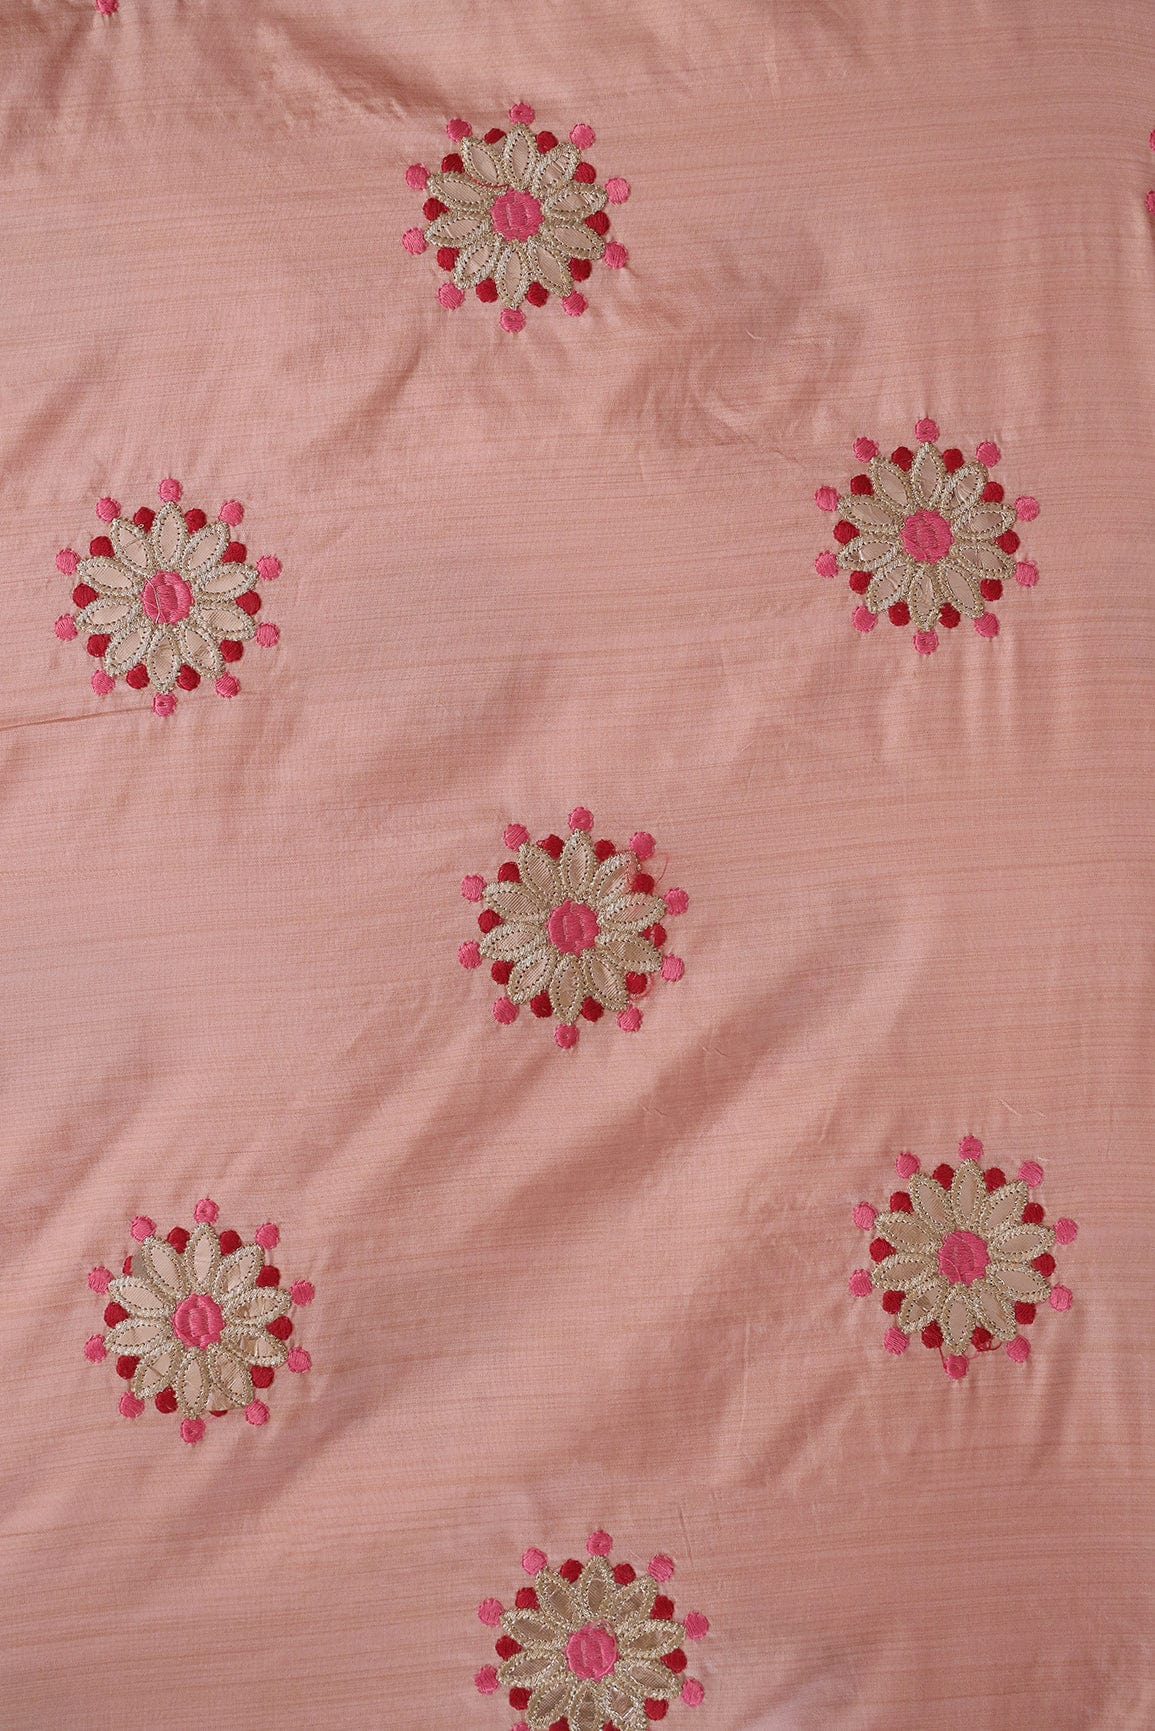 doeraa Embroidery Fabrics Zari With Red and Pink Leafy Motif Embroidery On Peach Bamboo Silk Fabric